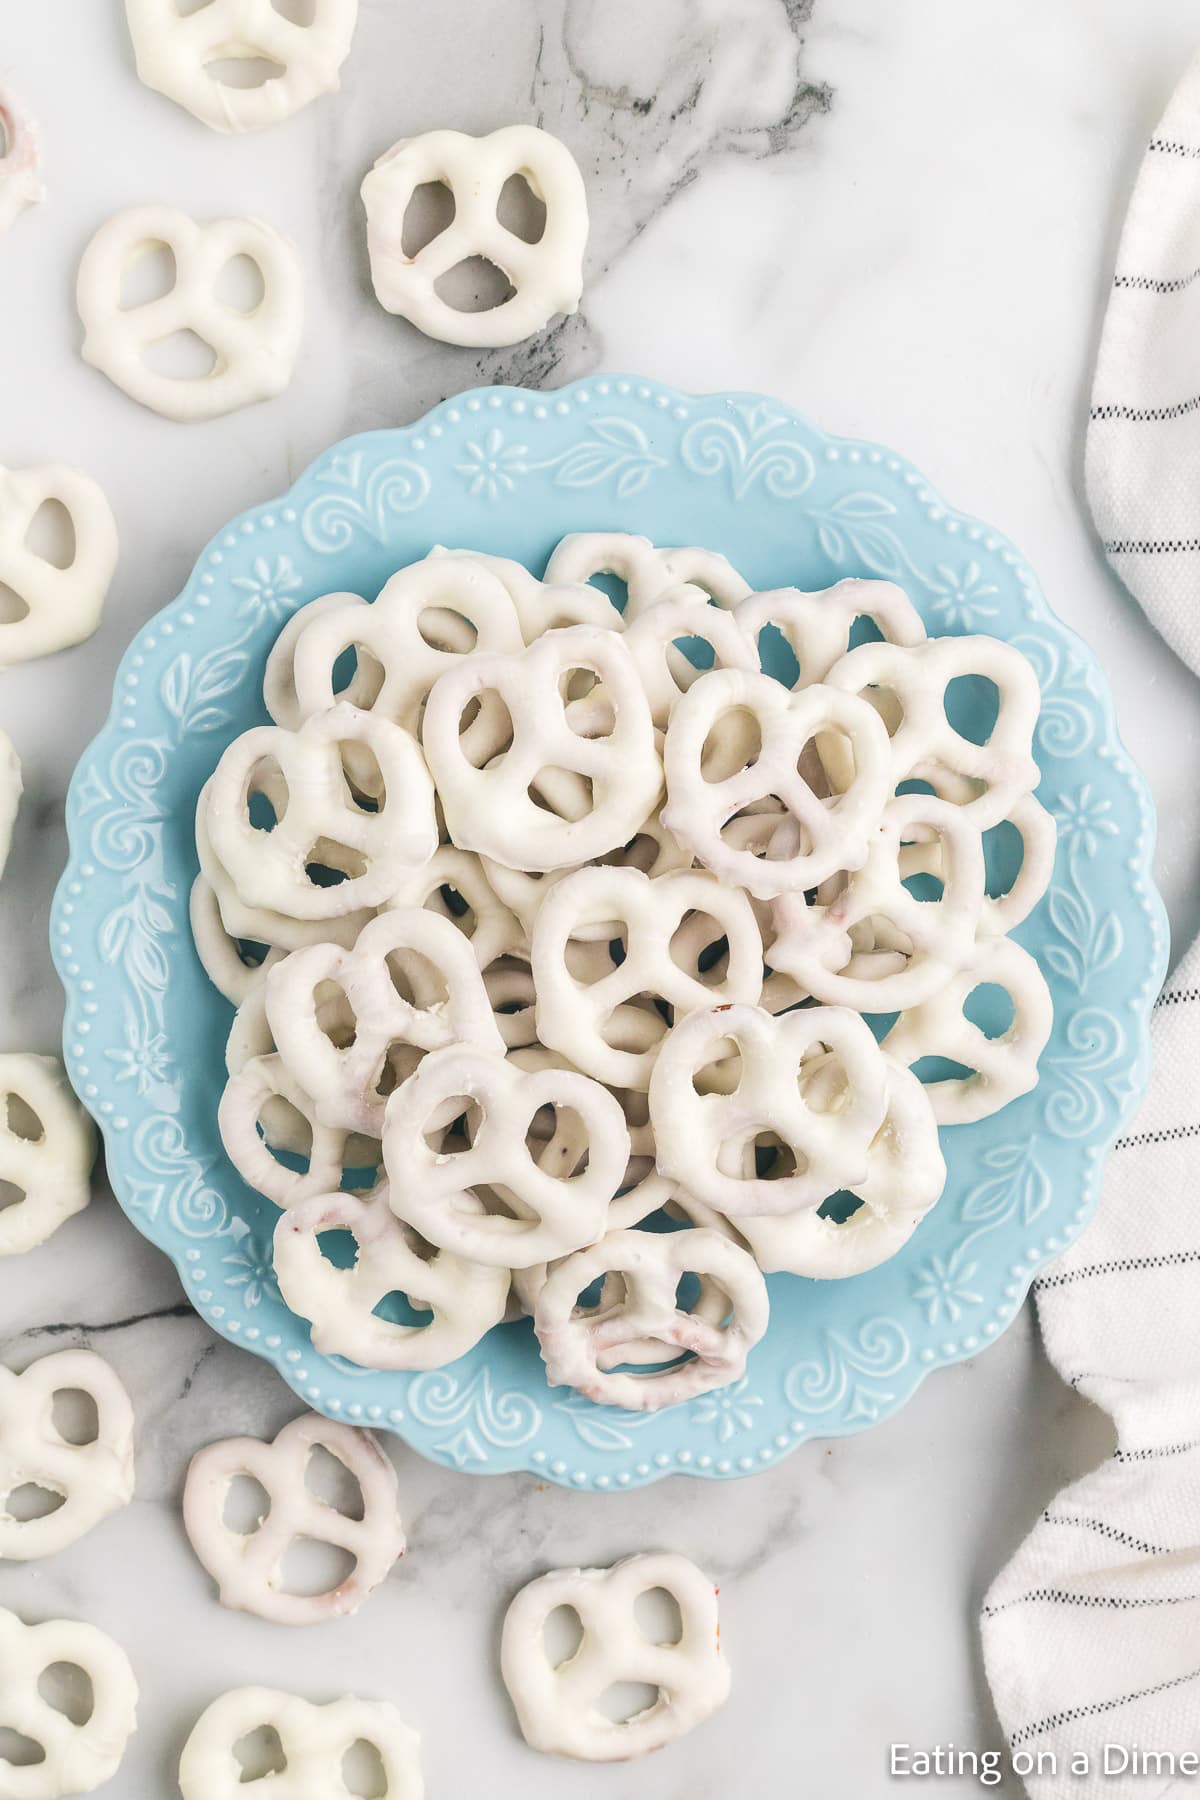 Close up image of white chocolate pretzels in a bowl